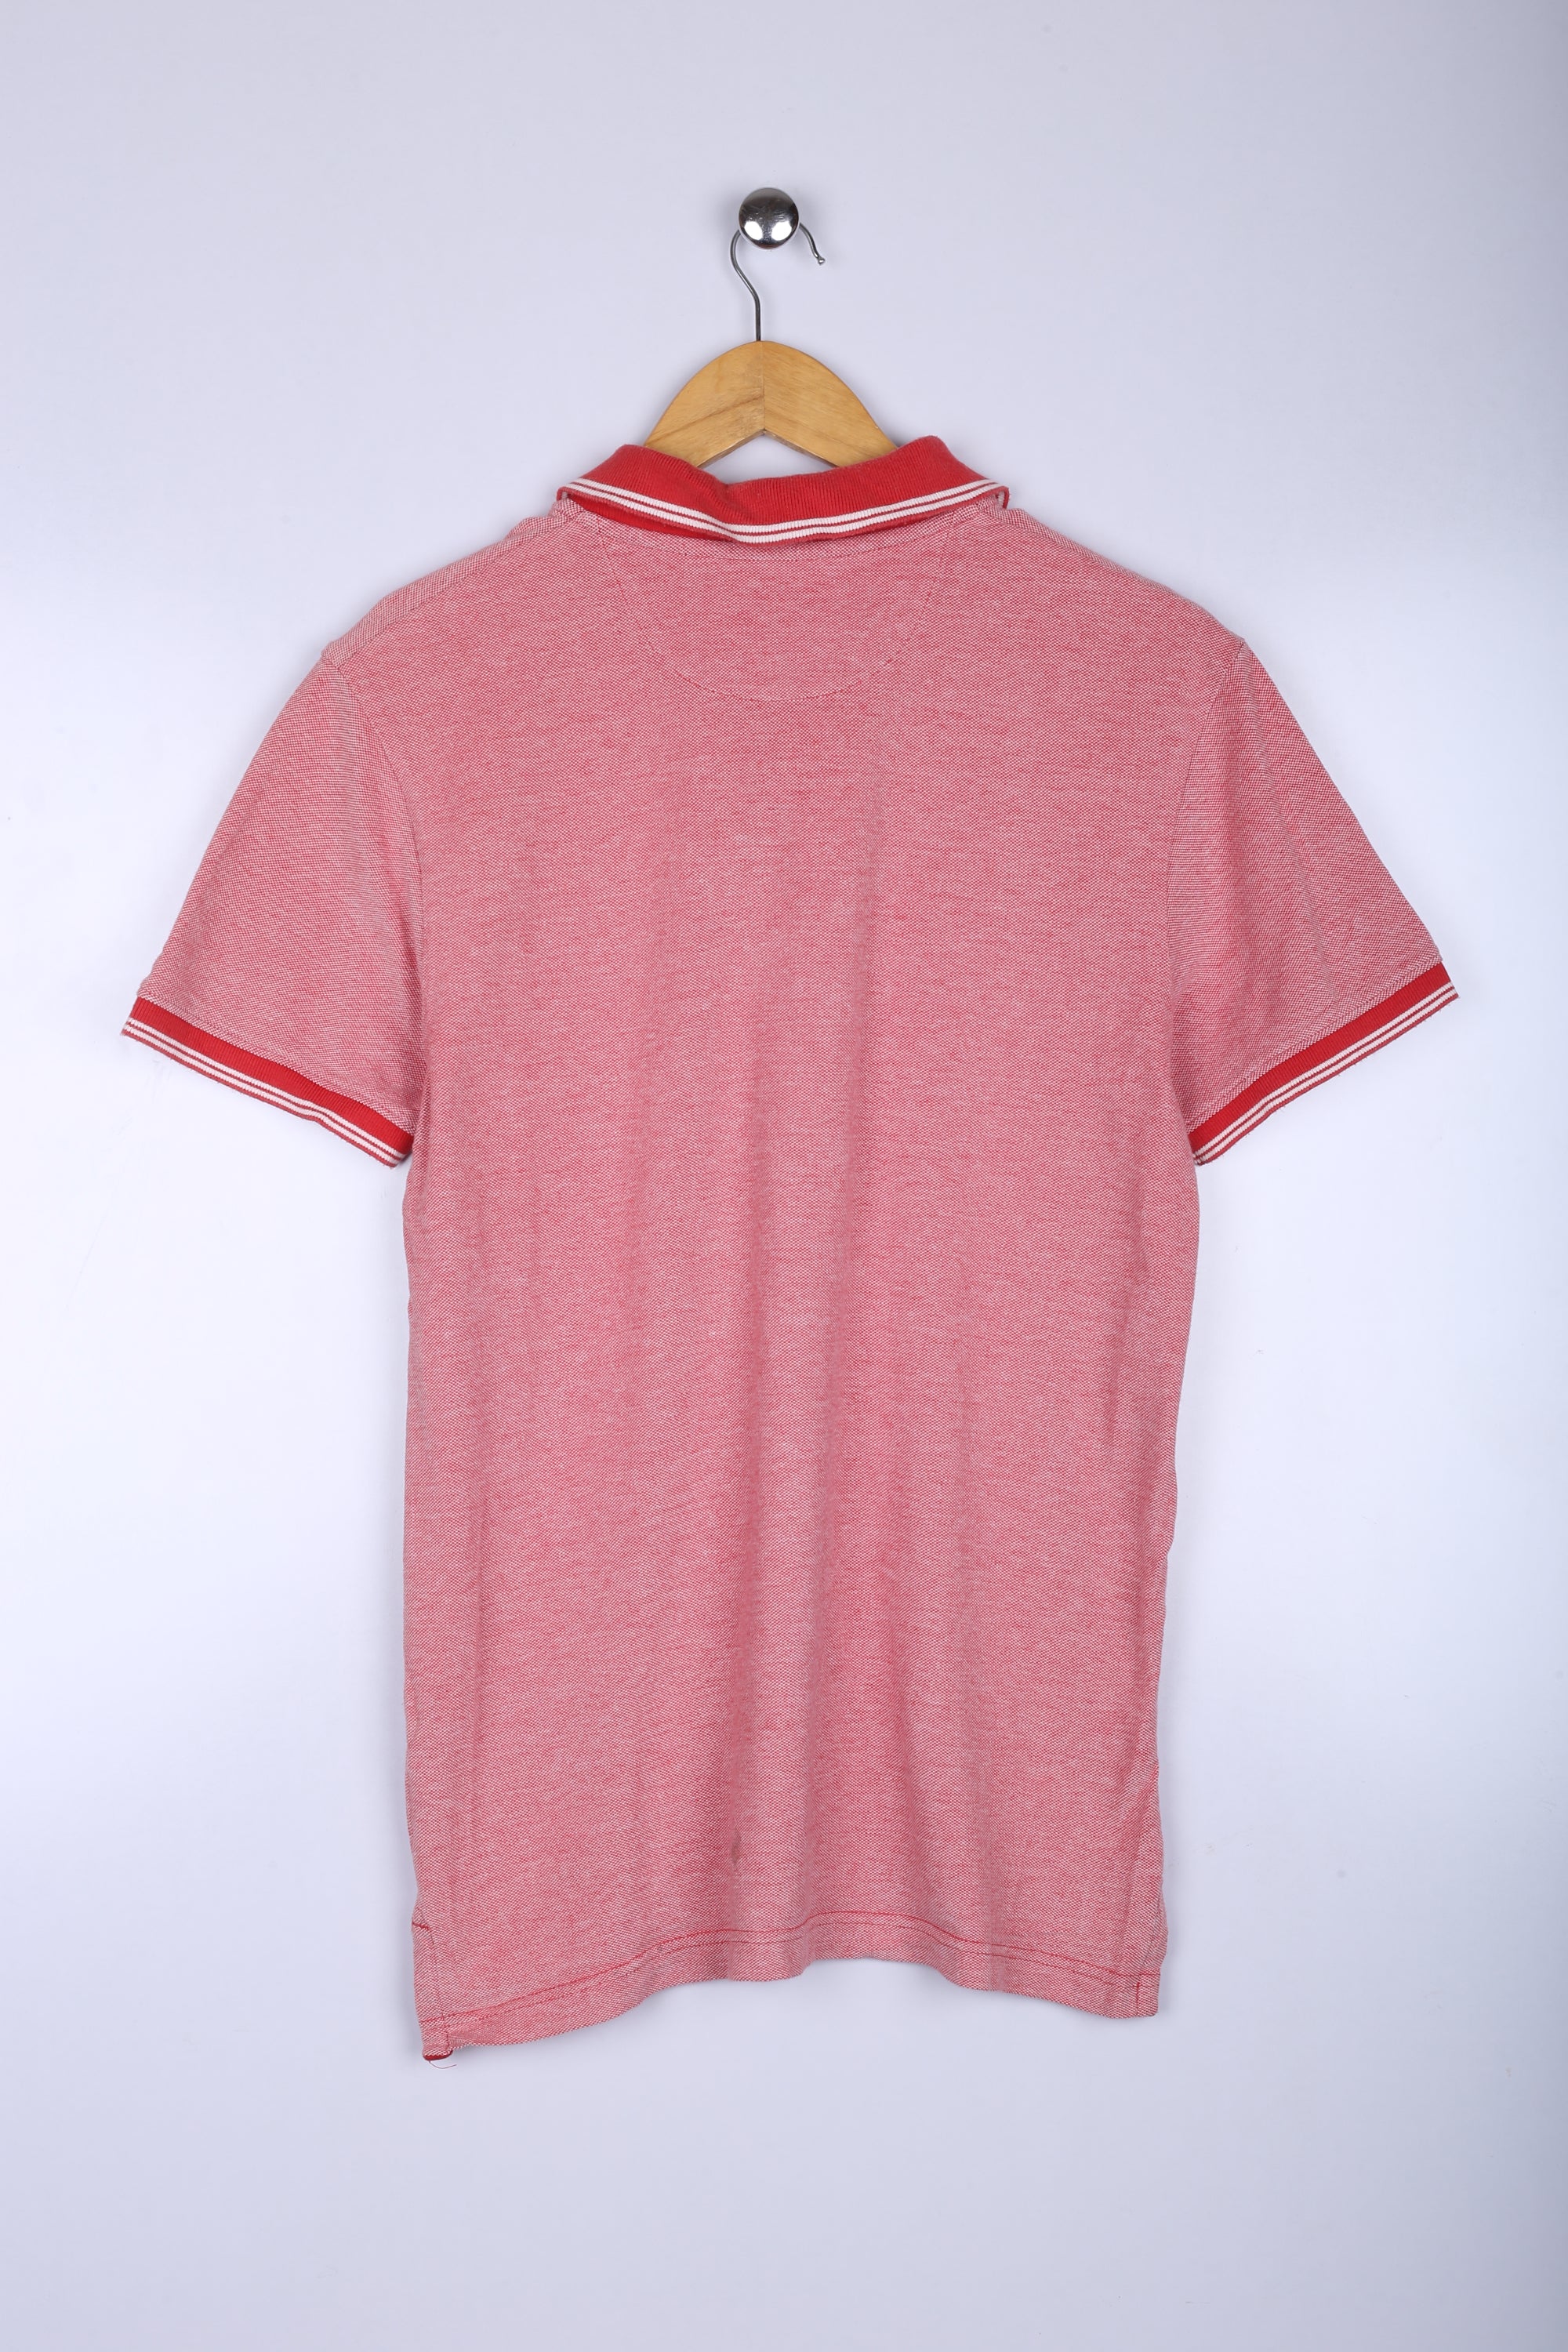 Vintage 90's Timberland Polo Pink/Red